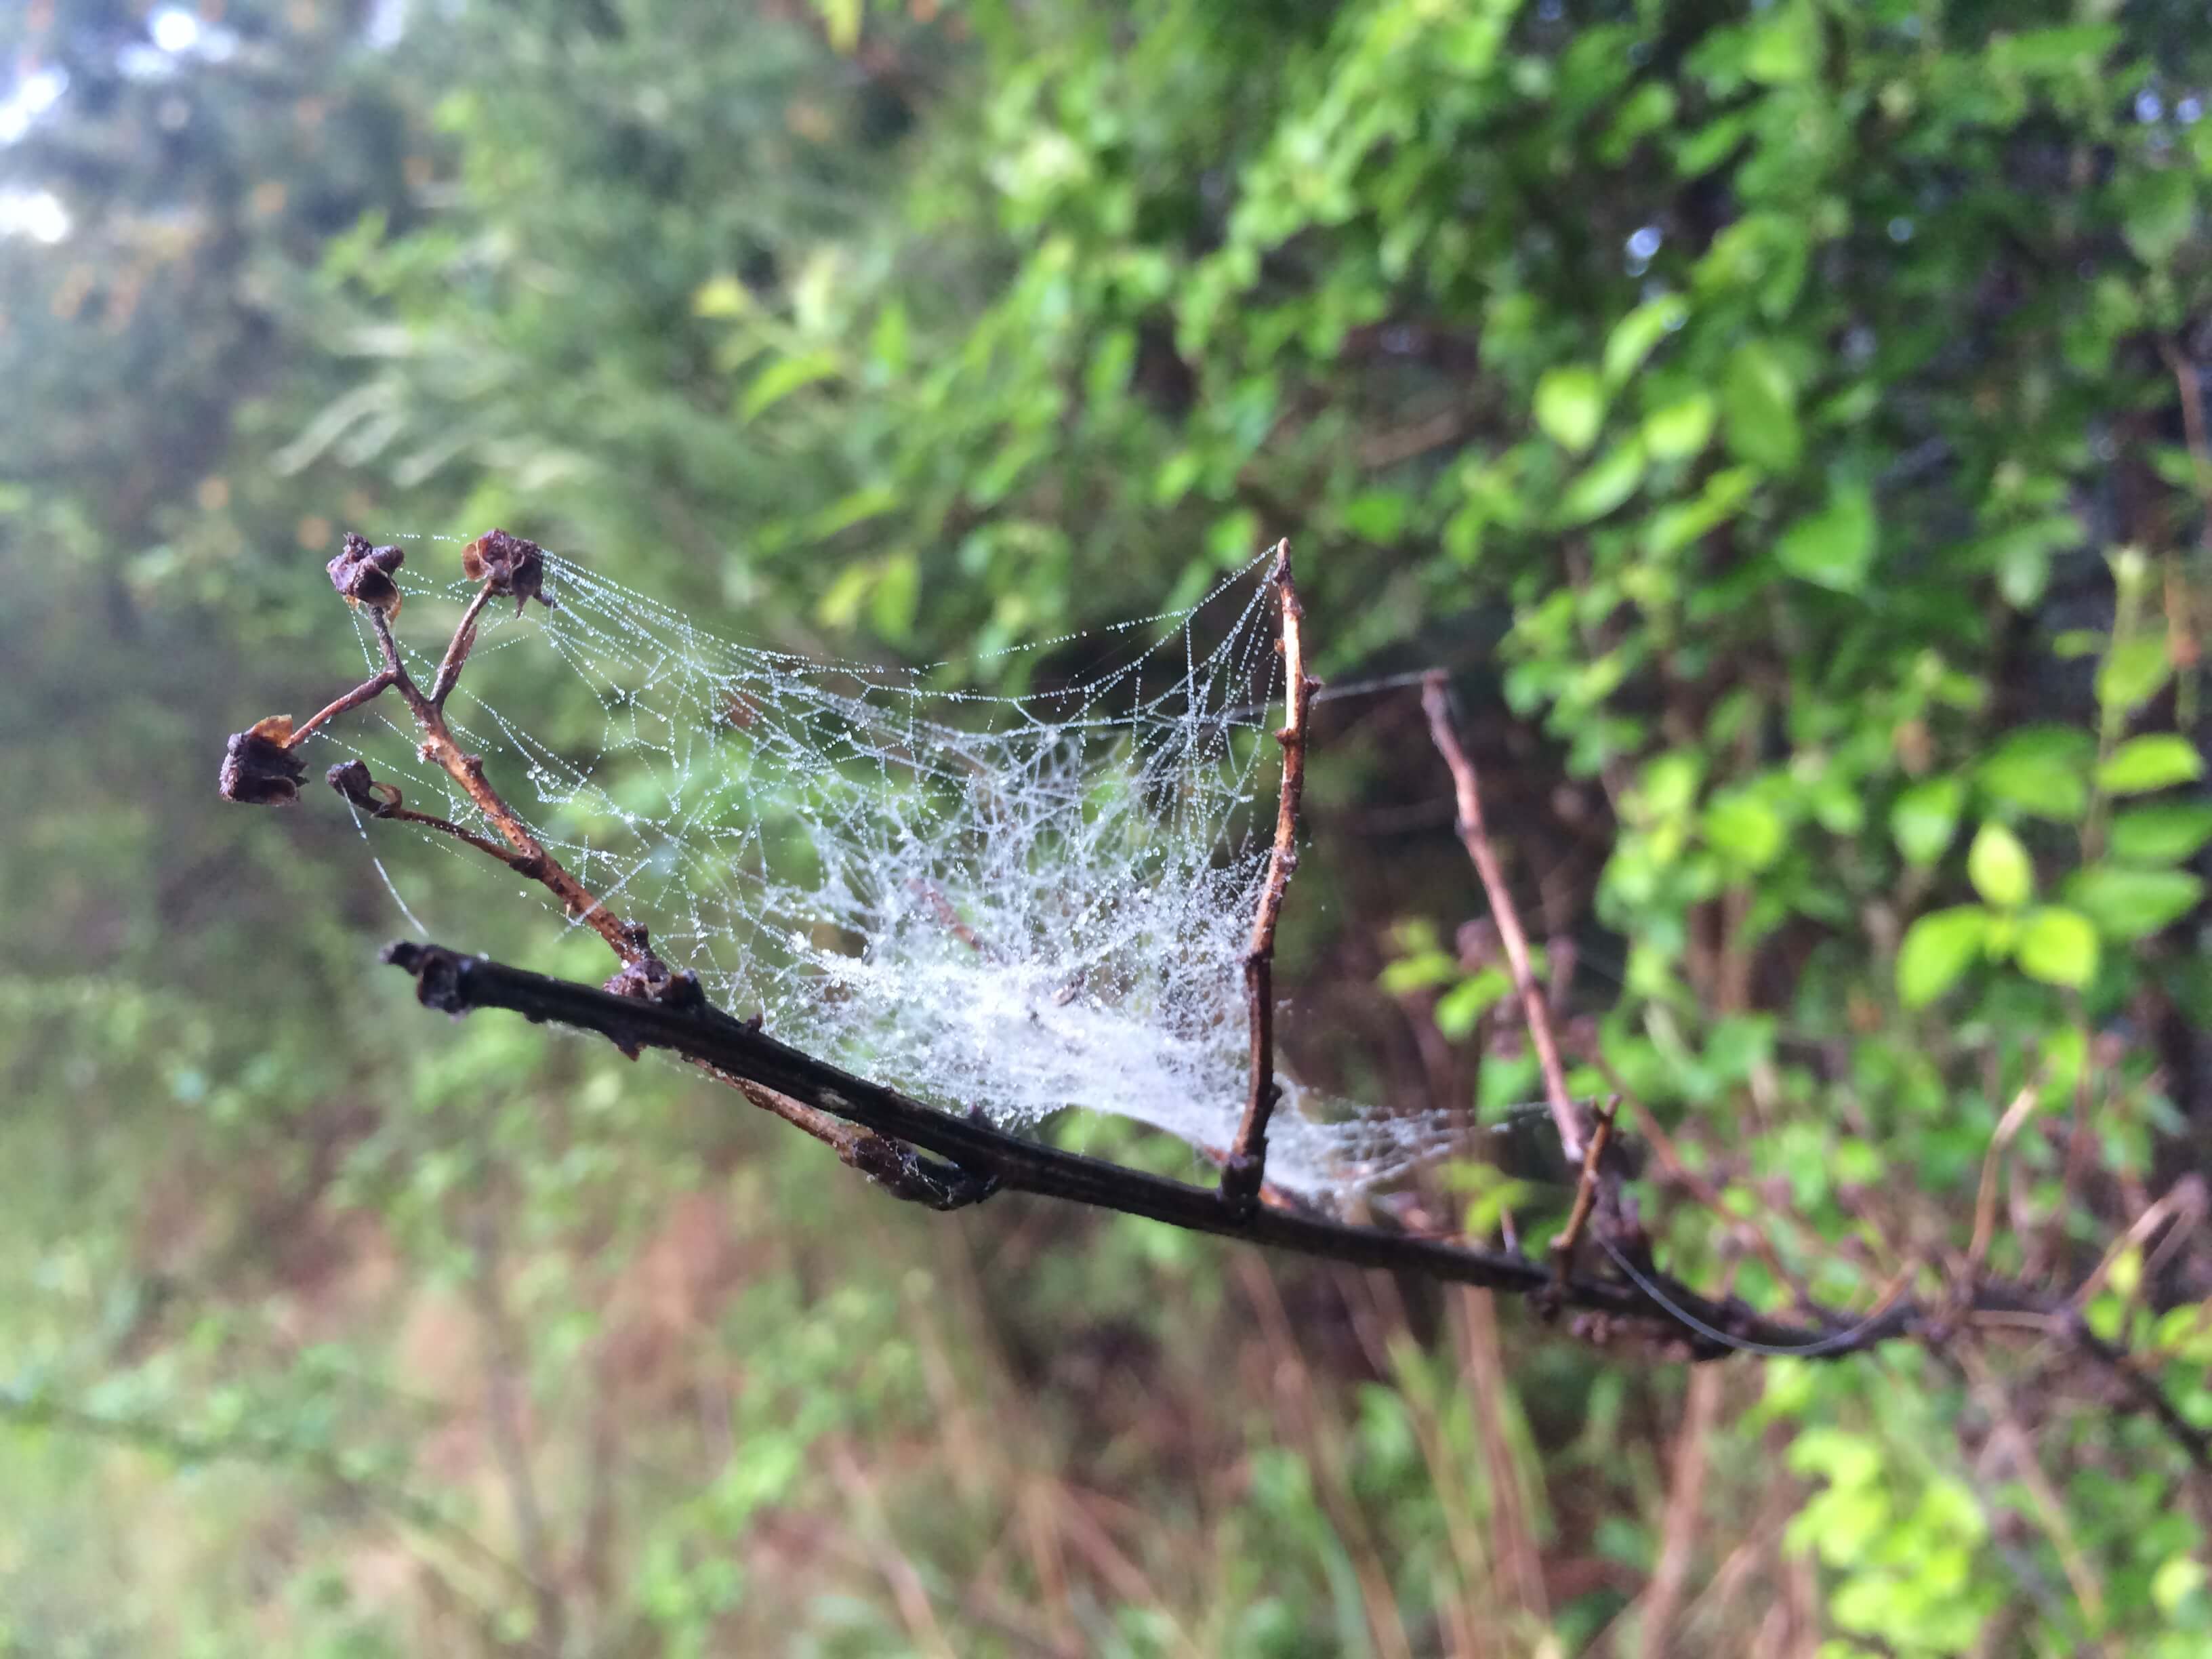 dew on a spider's web